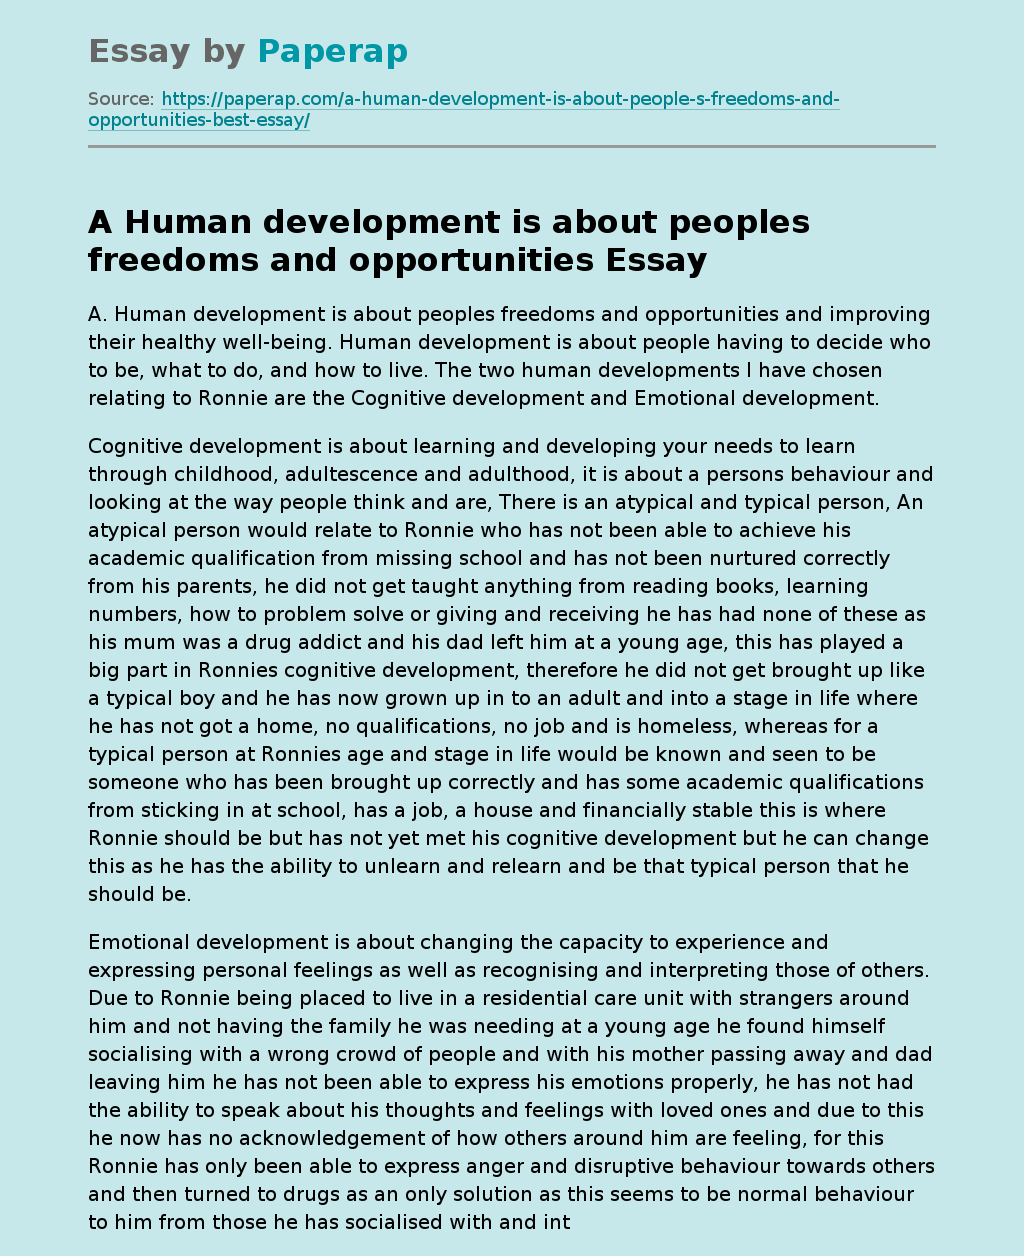 Human Development Is About Peoples Freedoms and Opportunities